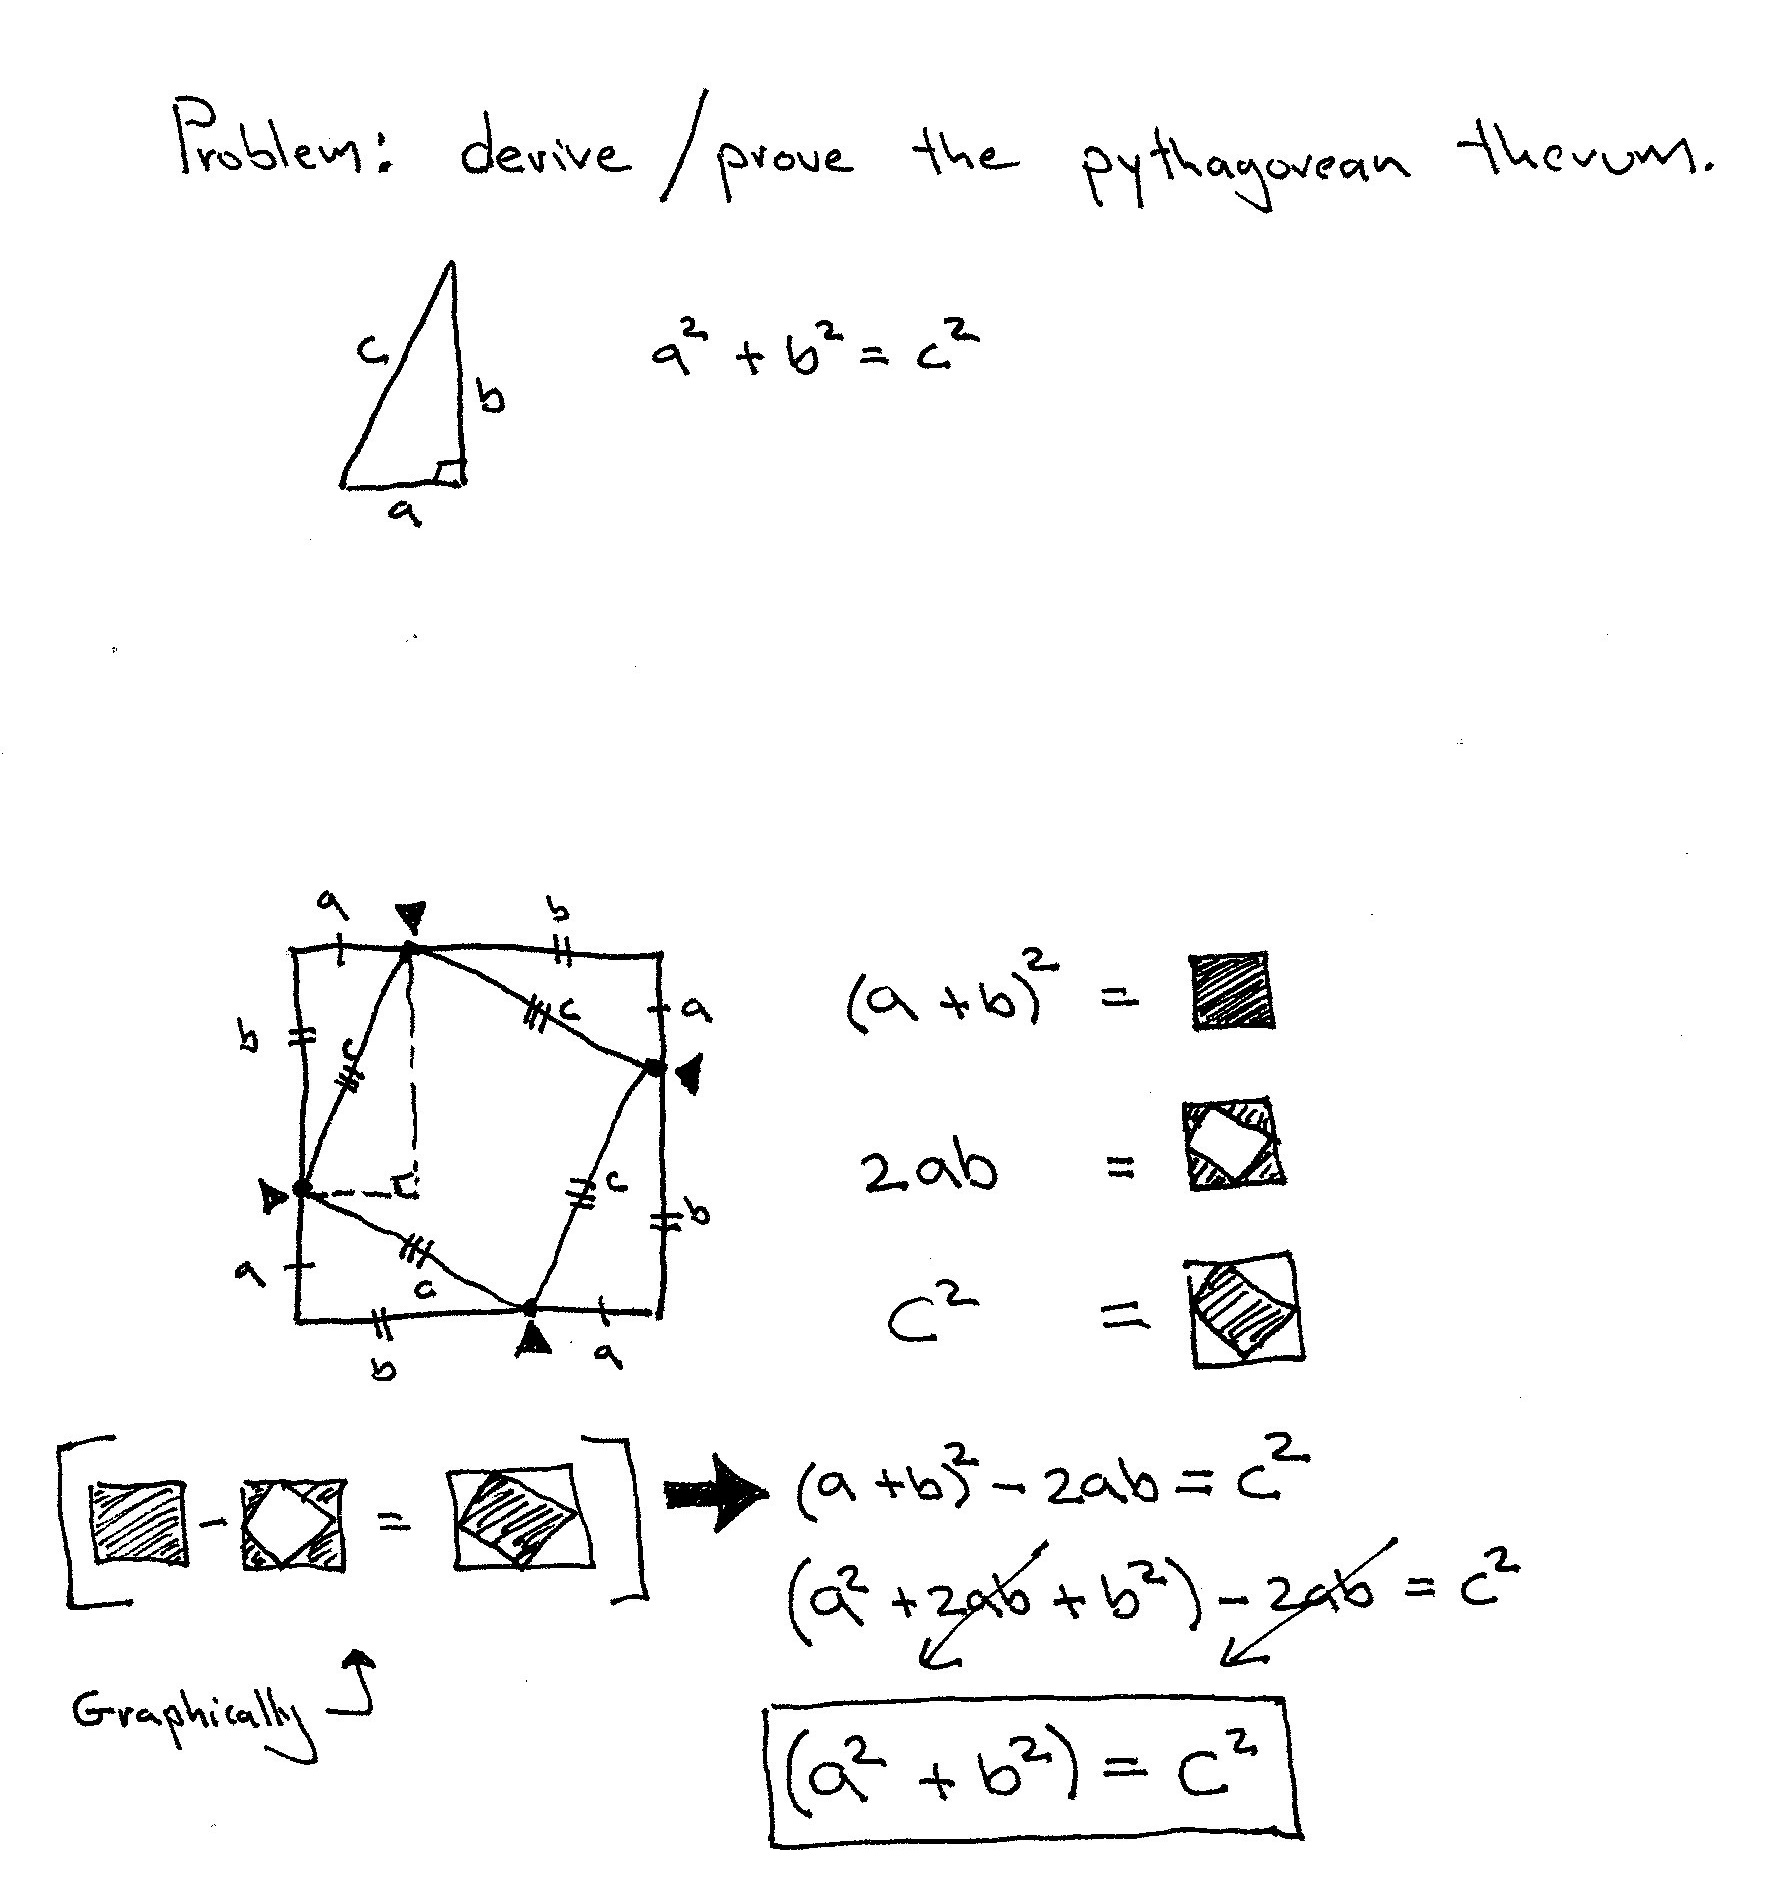 Graphical proof for the pythagorean theorem